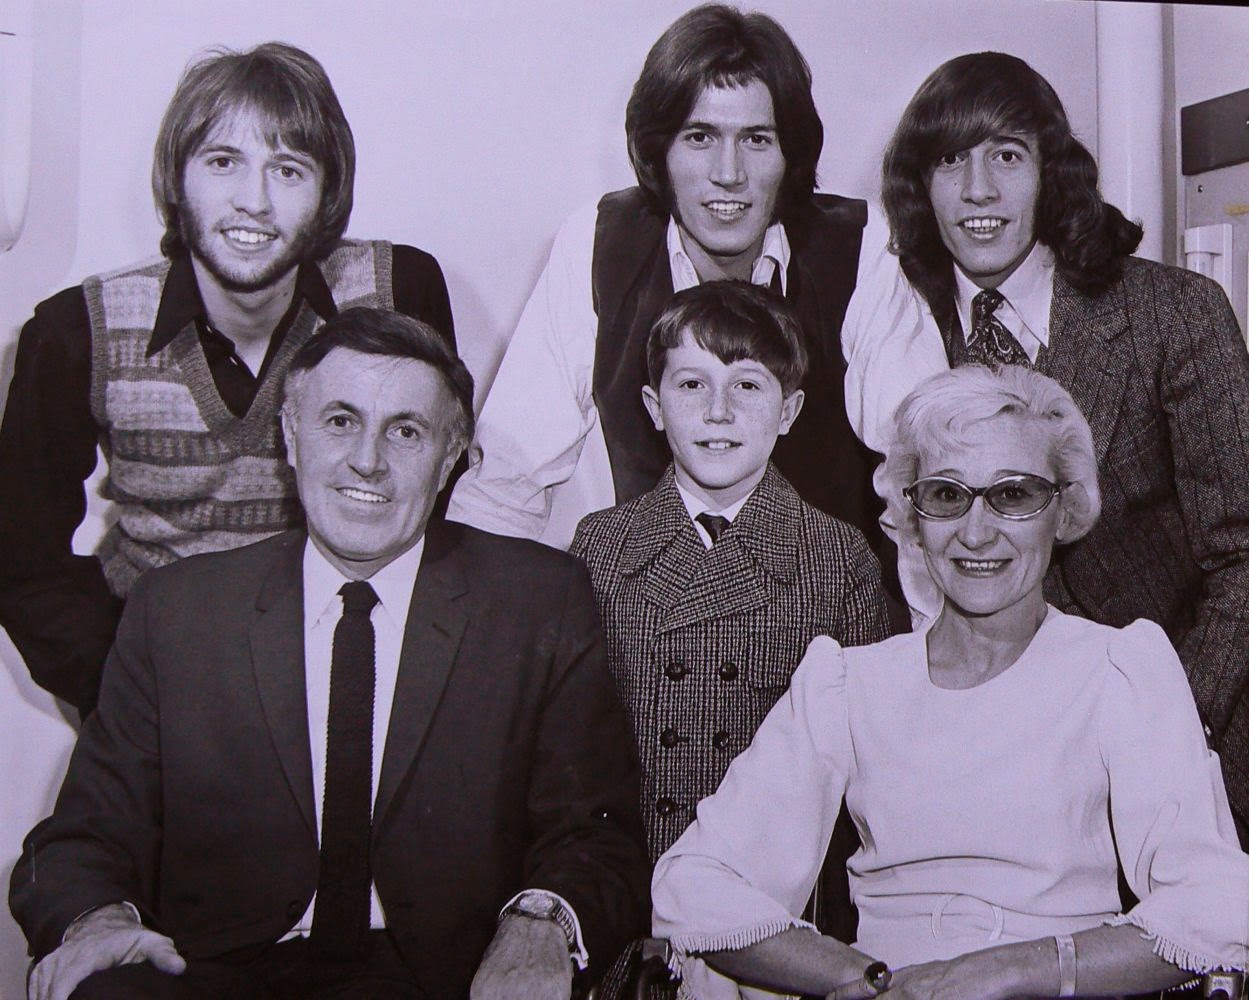 A photo of the Bee Gees (back row): Maurice, Barry and Robin Gibb, along with the rest of their family (front): Hugh, Andy and Barbara Gibb. 5 of 23Bee Gees: With age comes interesting hair. A photo of the Bee Gees (back row): Maurice, Barry and Robin Gibb, along with the rest of their family (front): Hugh, Andy and Barbara Gibb. http://www.jinglejanglejungle.net/2015/01/bgs.html